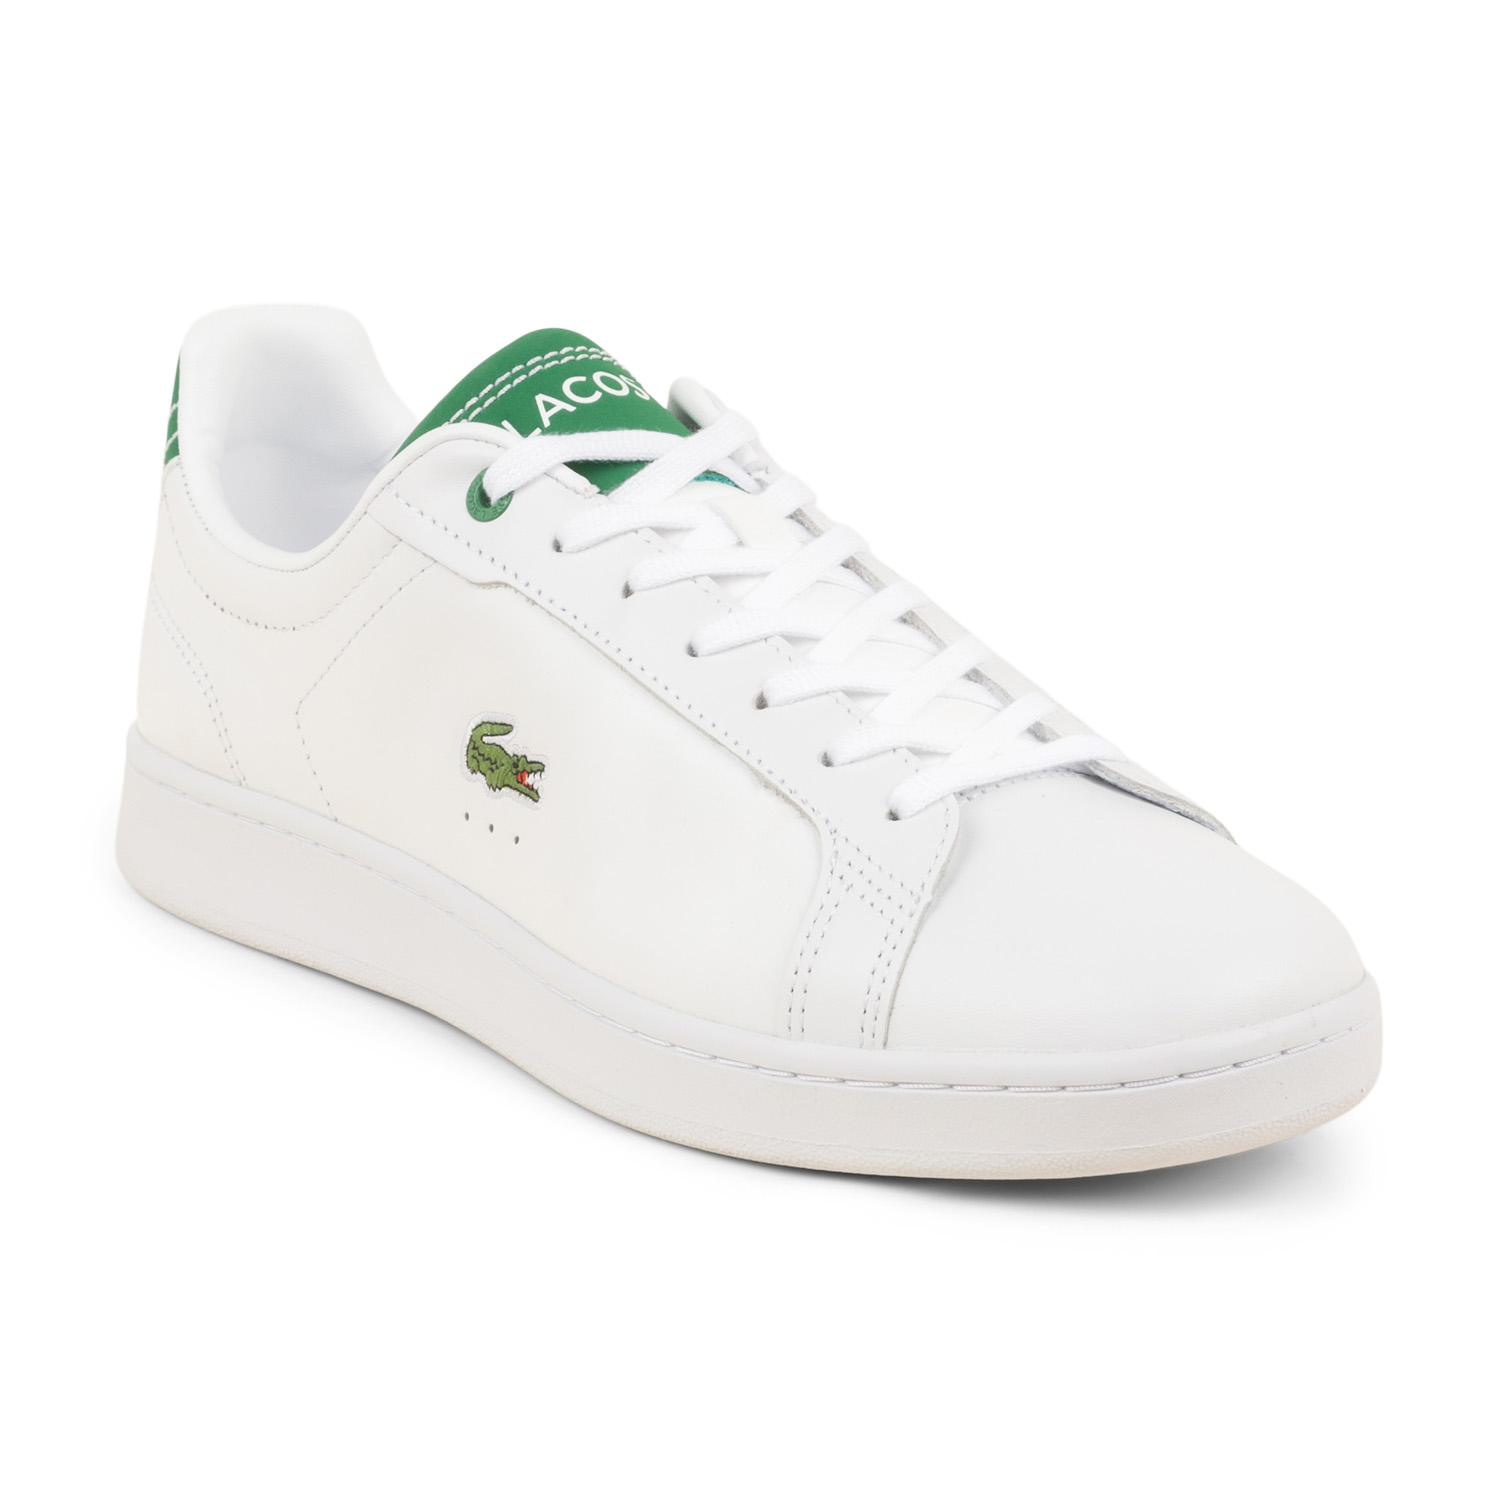 02 - CARNABY - LACOSTE - Baskets - Cuir